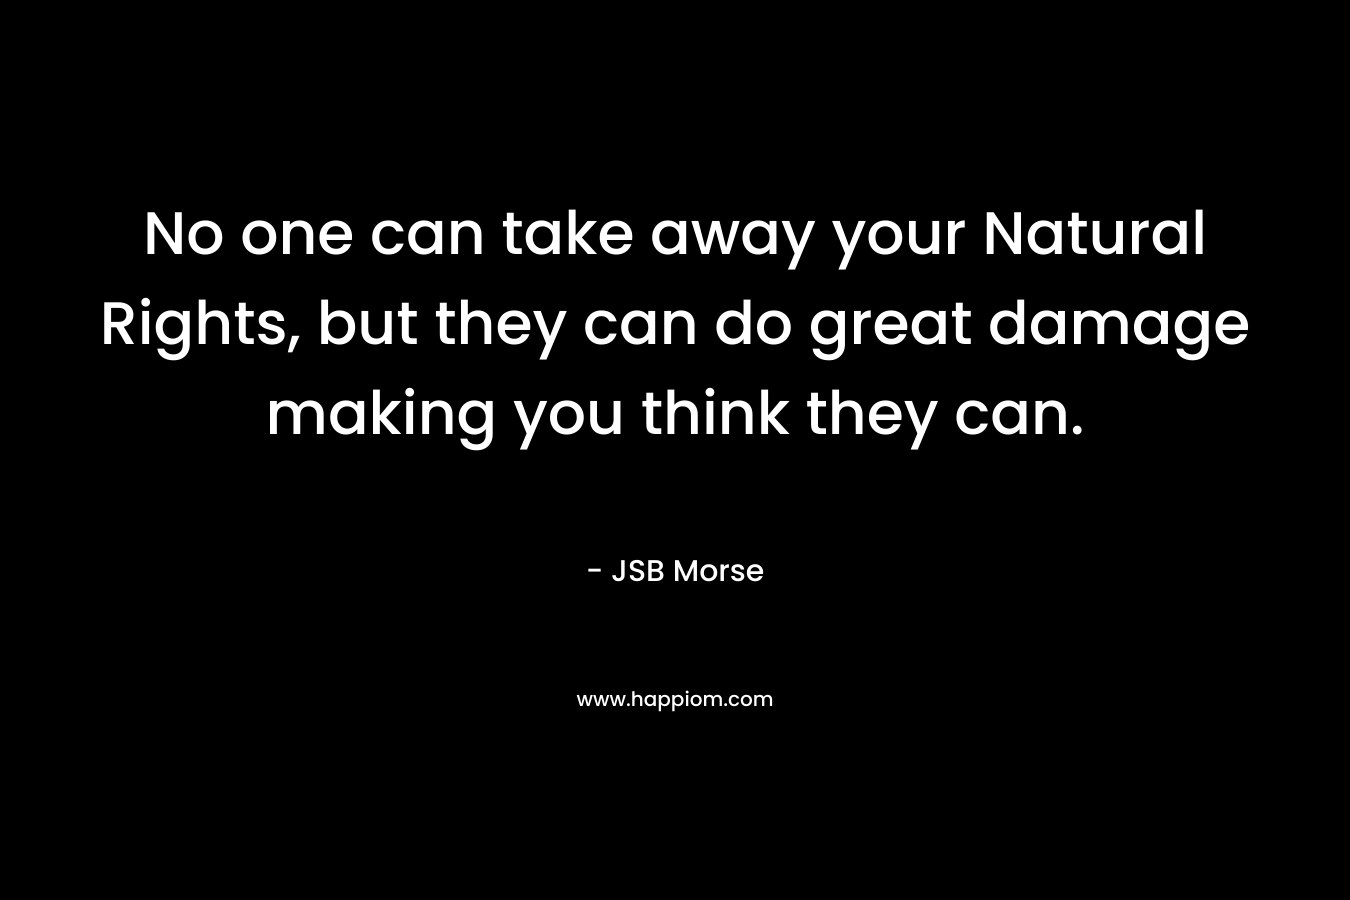 No one can take away your Natural Rights, but they can do great damage making you think they can. – JSB Morse